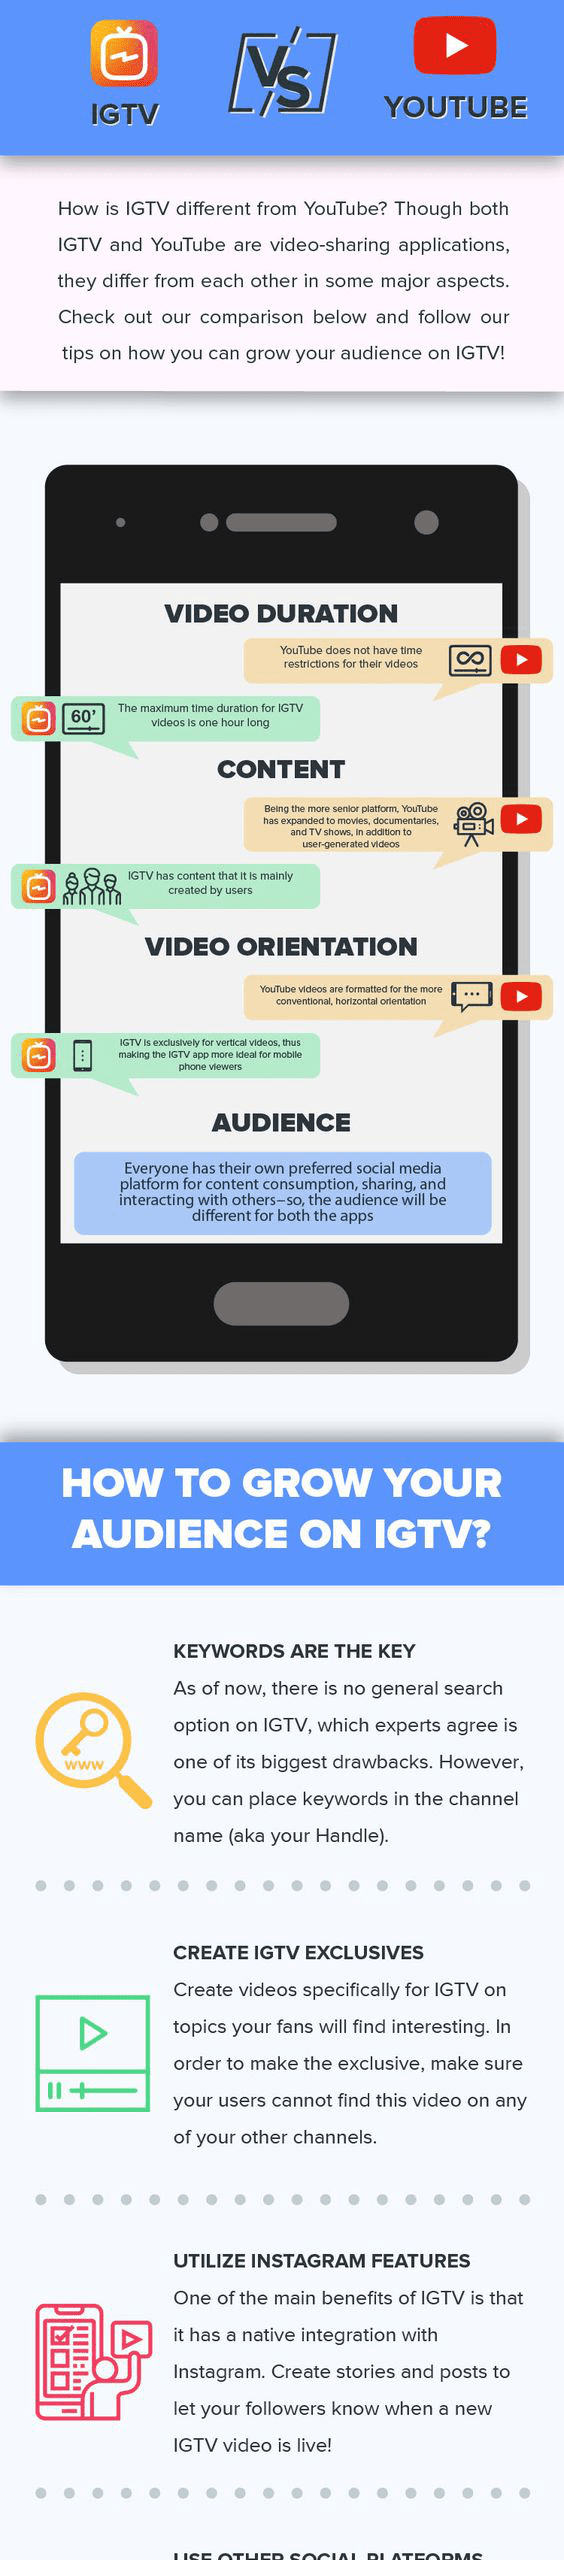 What Is IGTV And Why Should You Care About It?